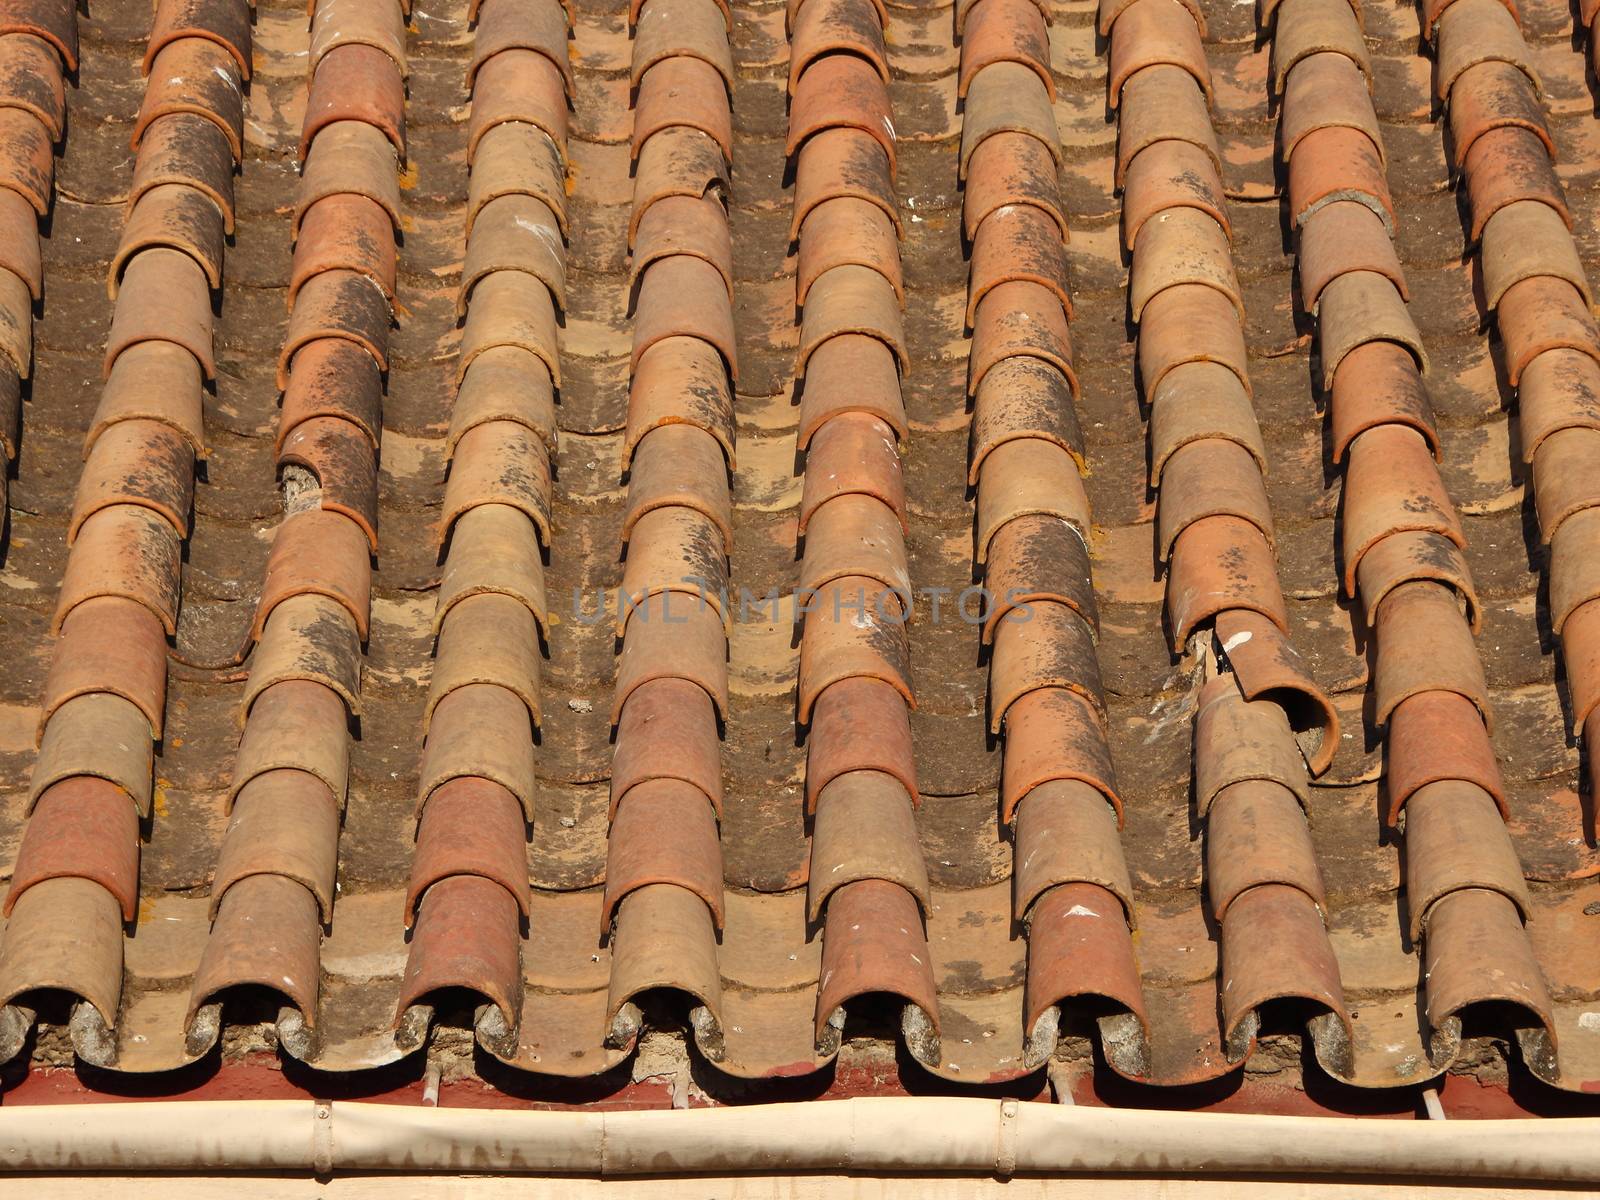 Worn Old Tile Brick Roof with Gutter in Warm Colors by HoleInTheBox